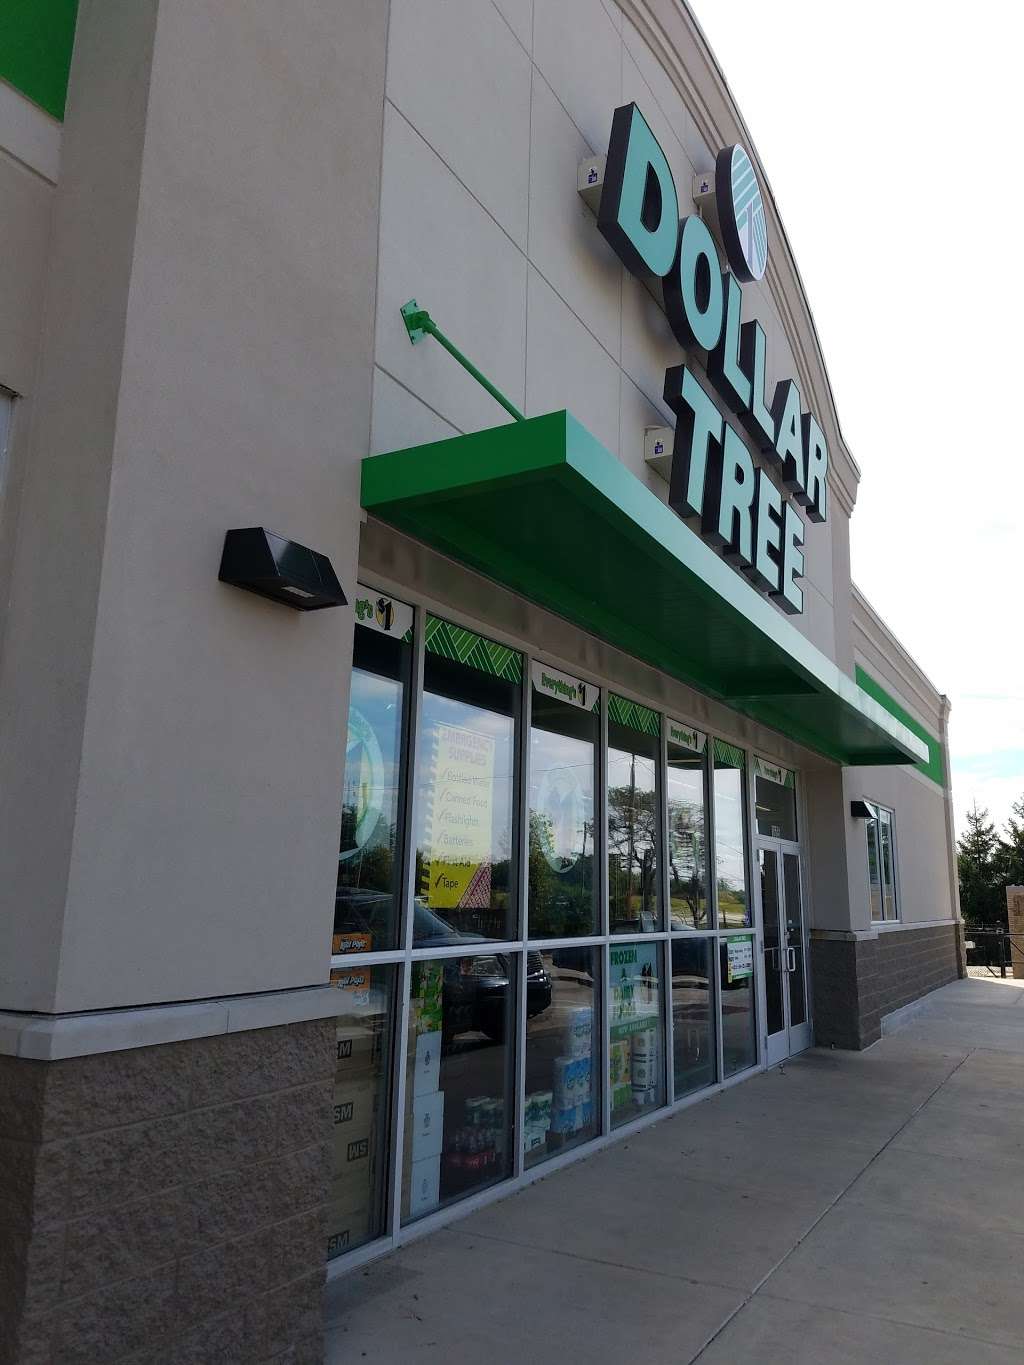 Dollar Tree | 1605 W Southport Rd, Indianapolis, IN 46217, USA | Phone: (317) 883-1328